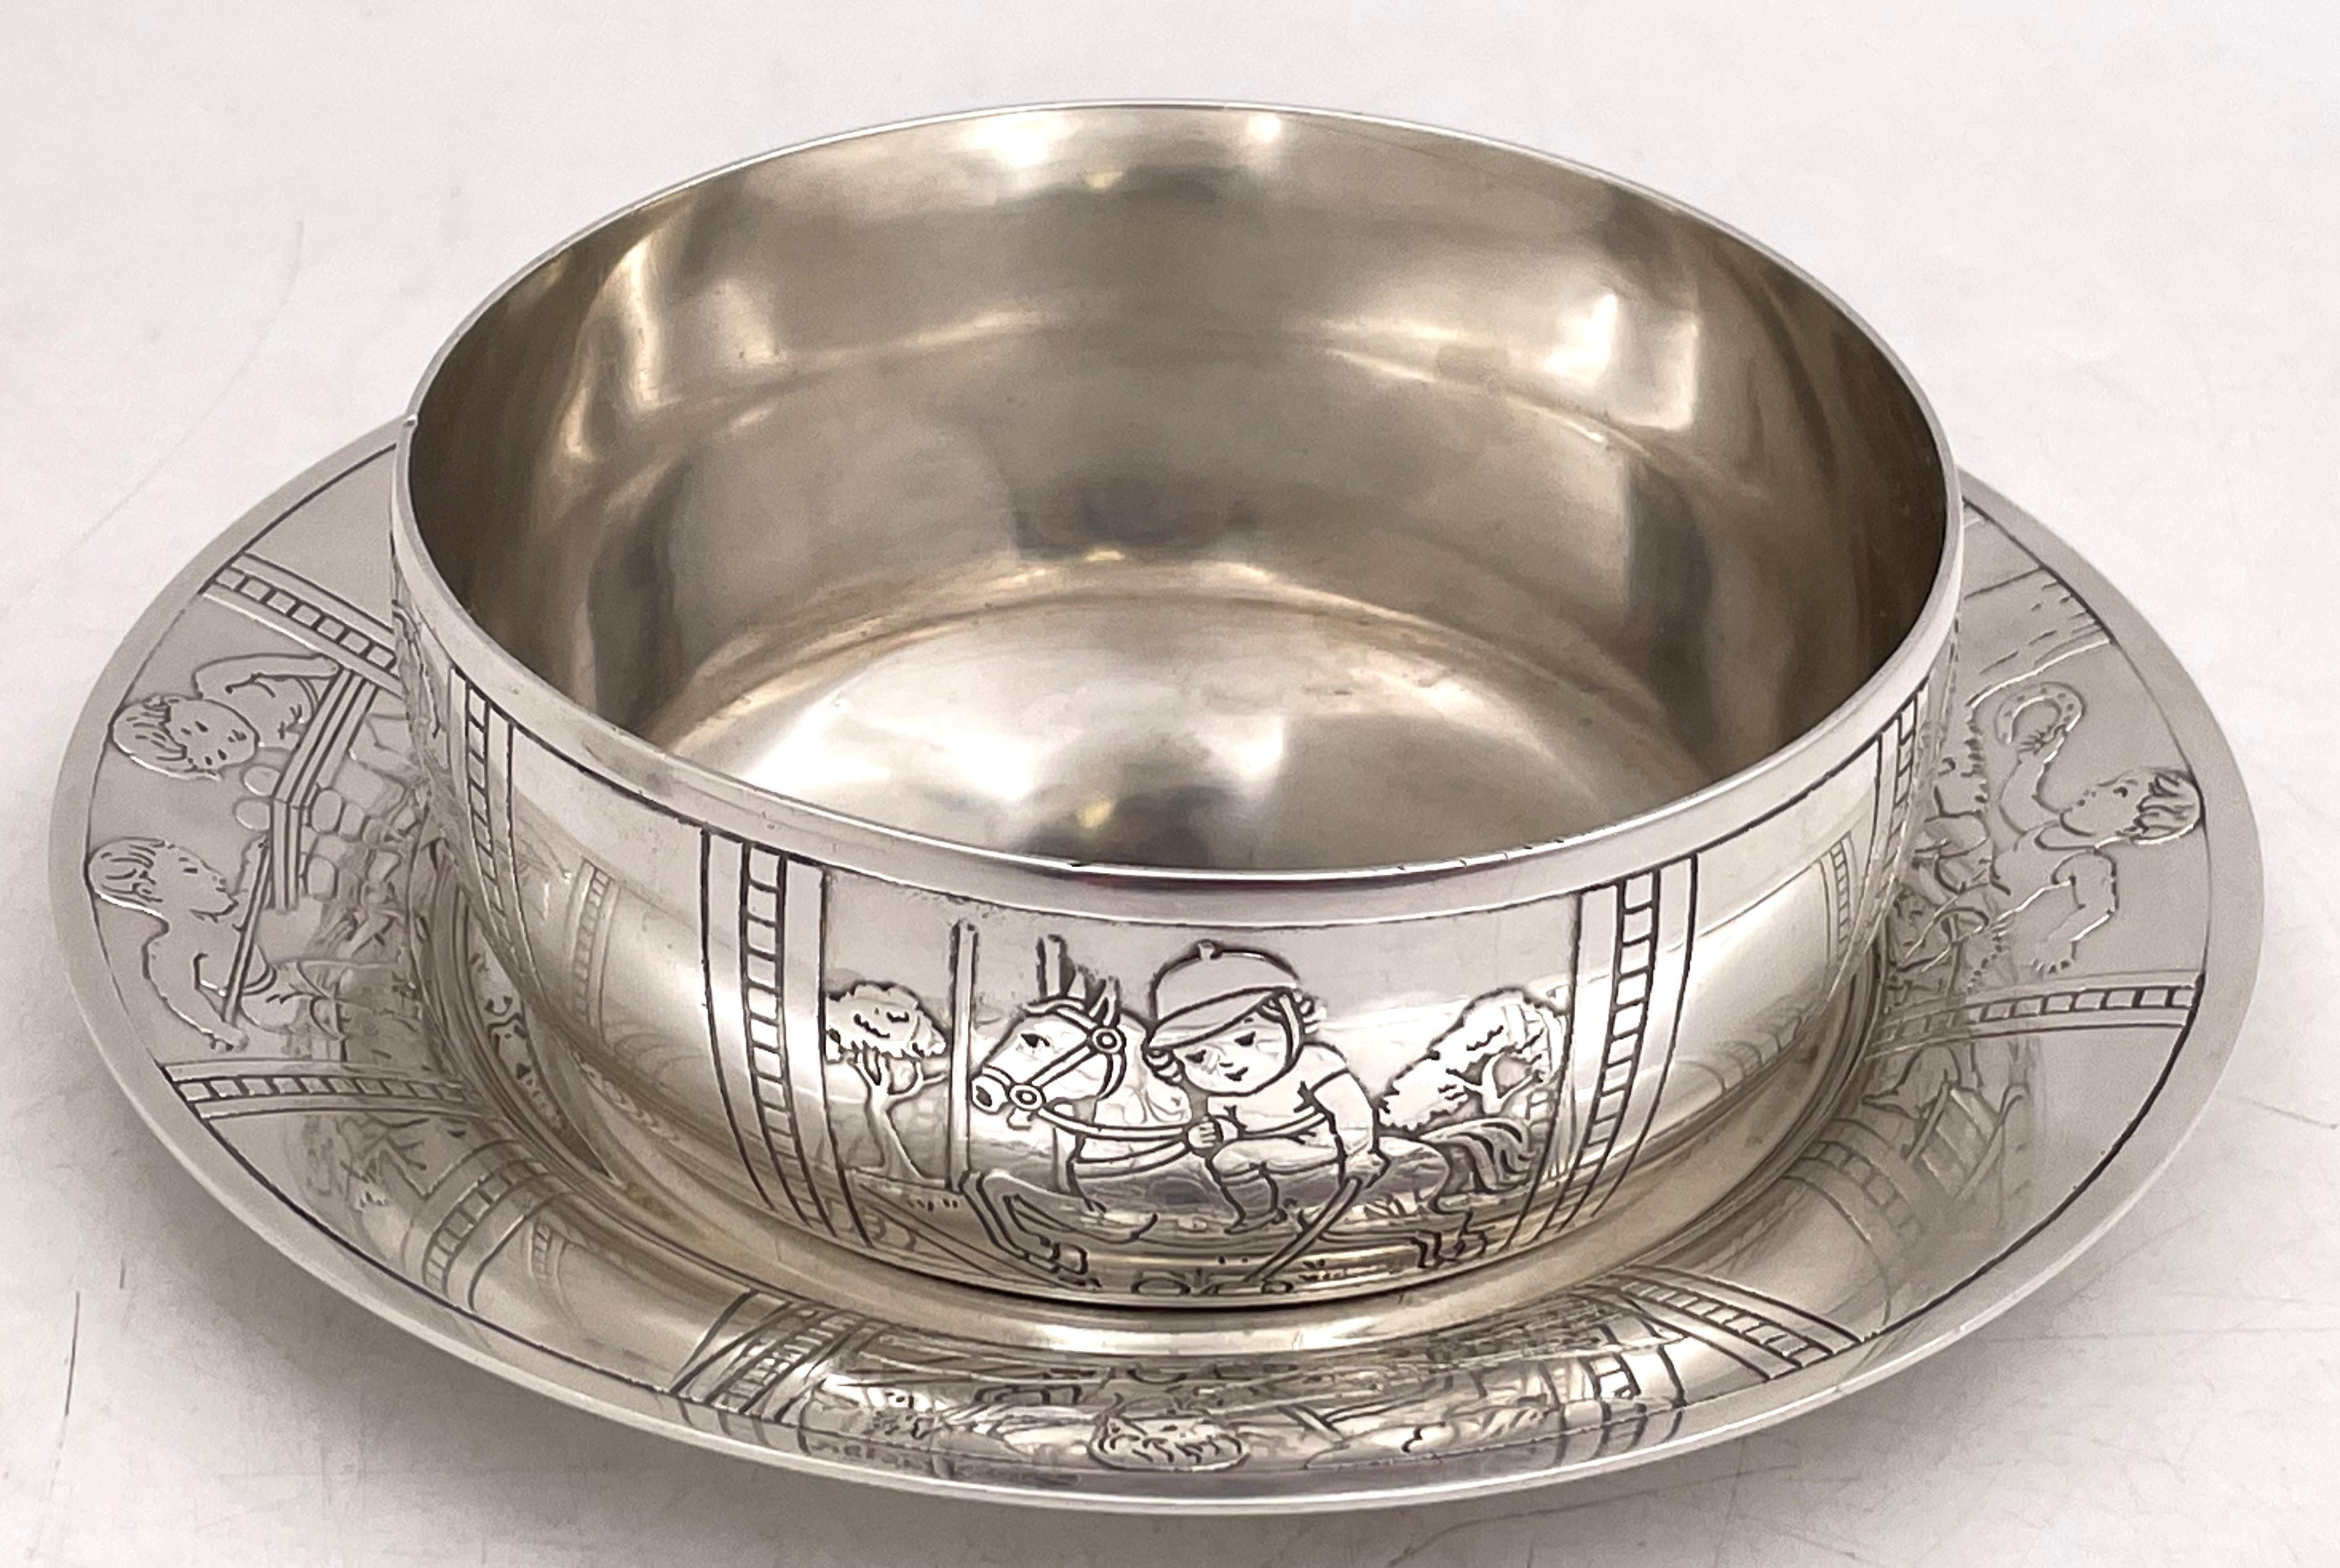 Tiffany & Co. sterling silver child bowl and underplate, showcasing boys playing various sports, and in Art Deco style, with an elegant geometric design. The design is from 1927 (pattern number 20850B) but the set was made between 1943 and 1945. The